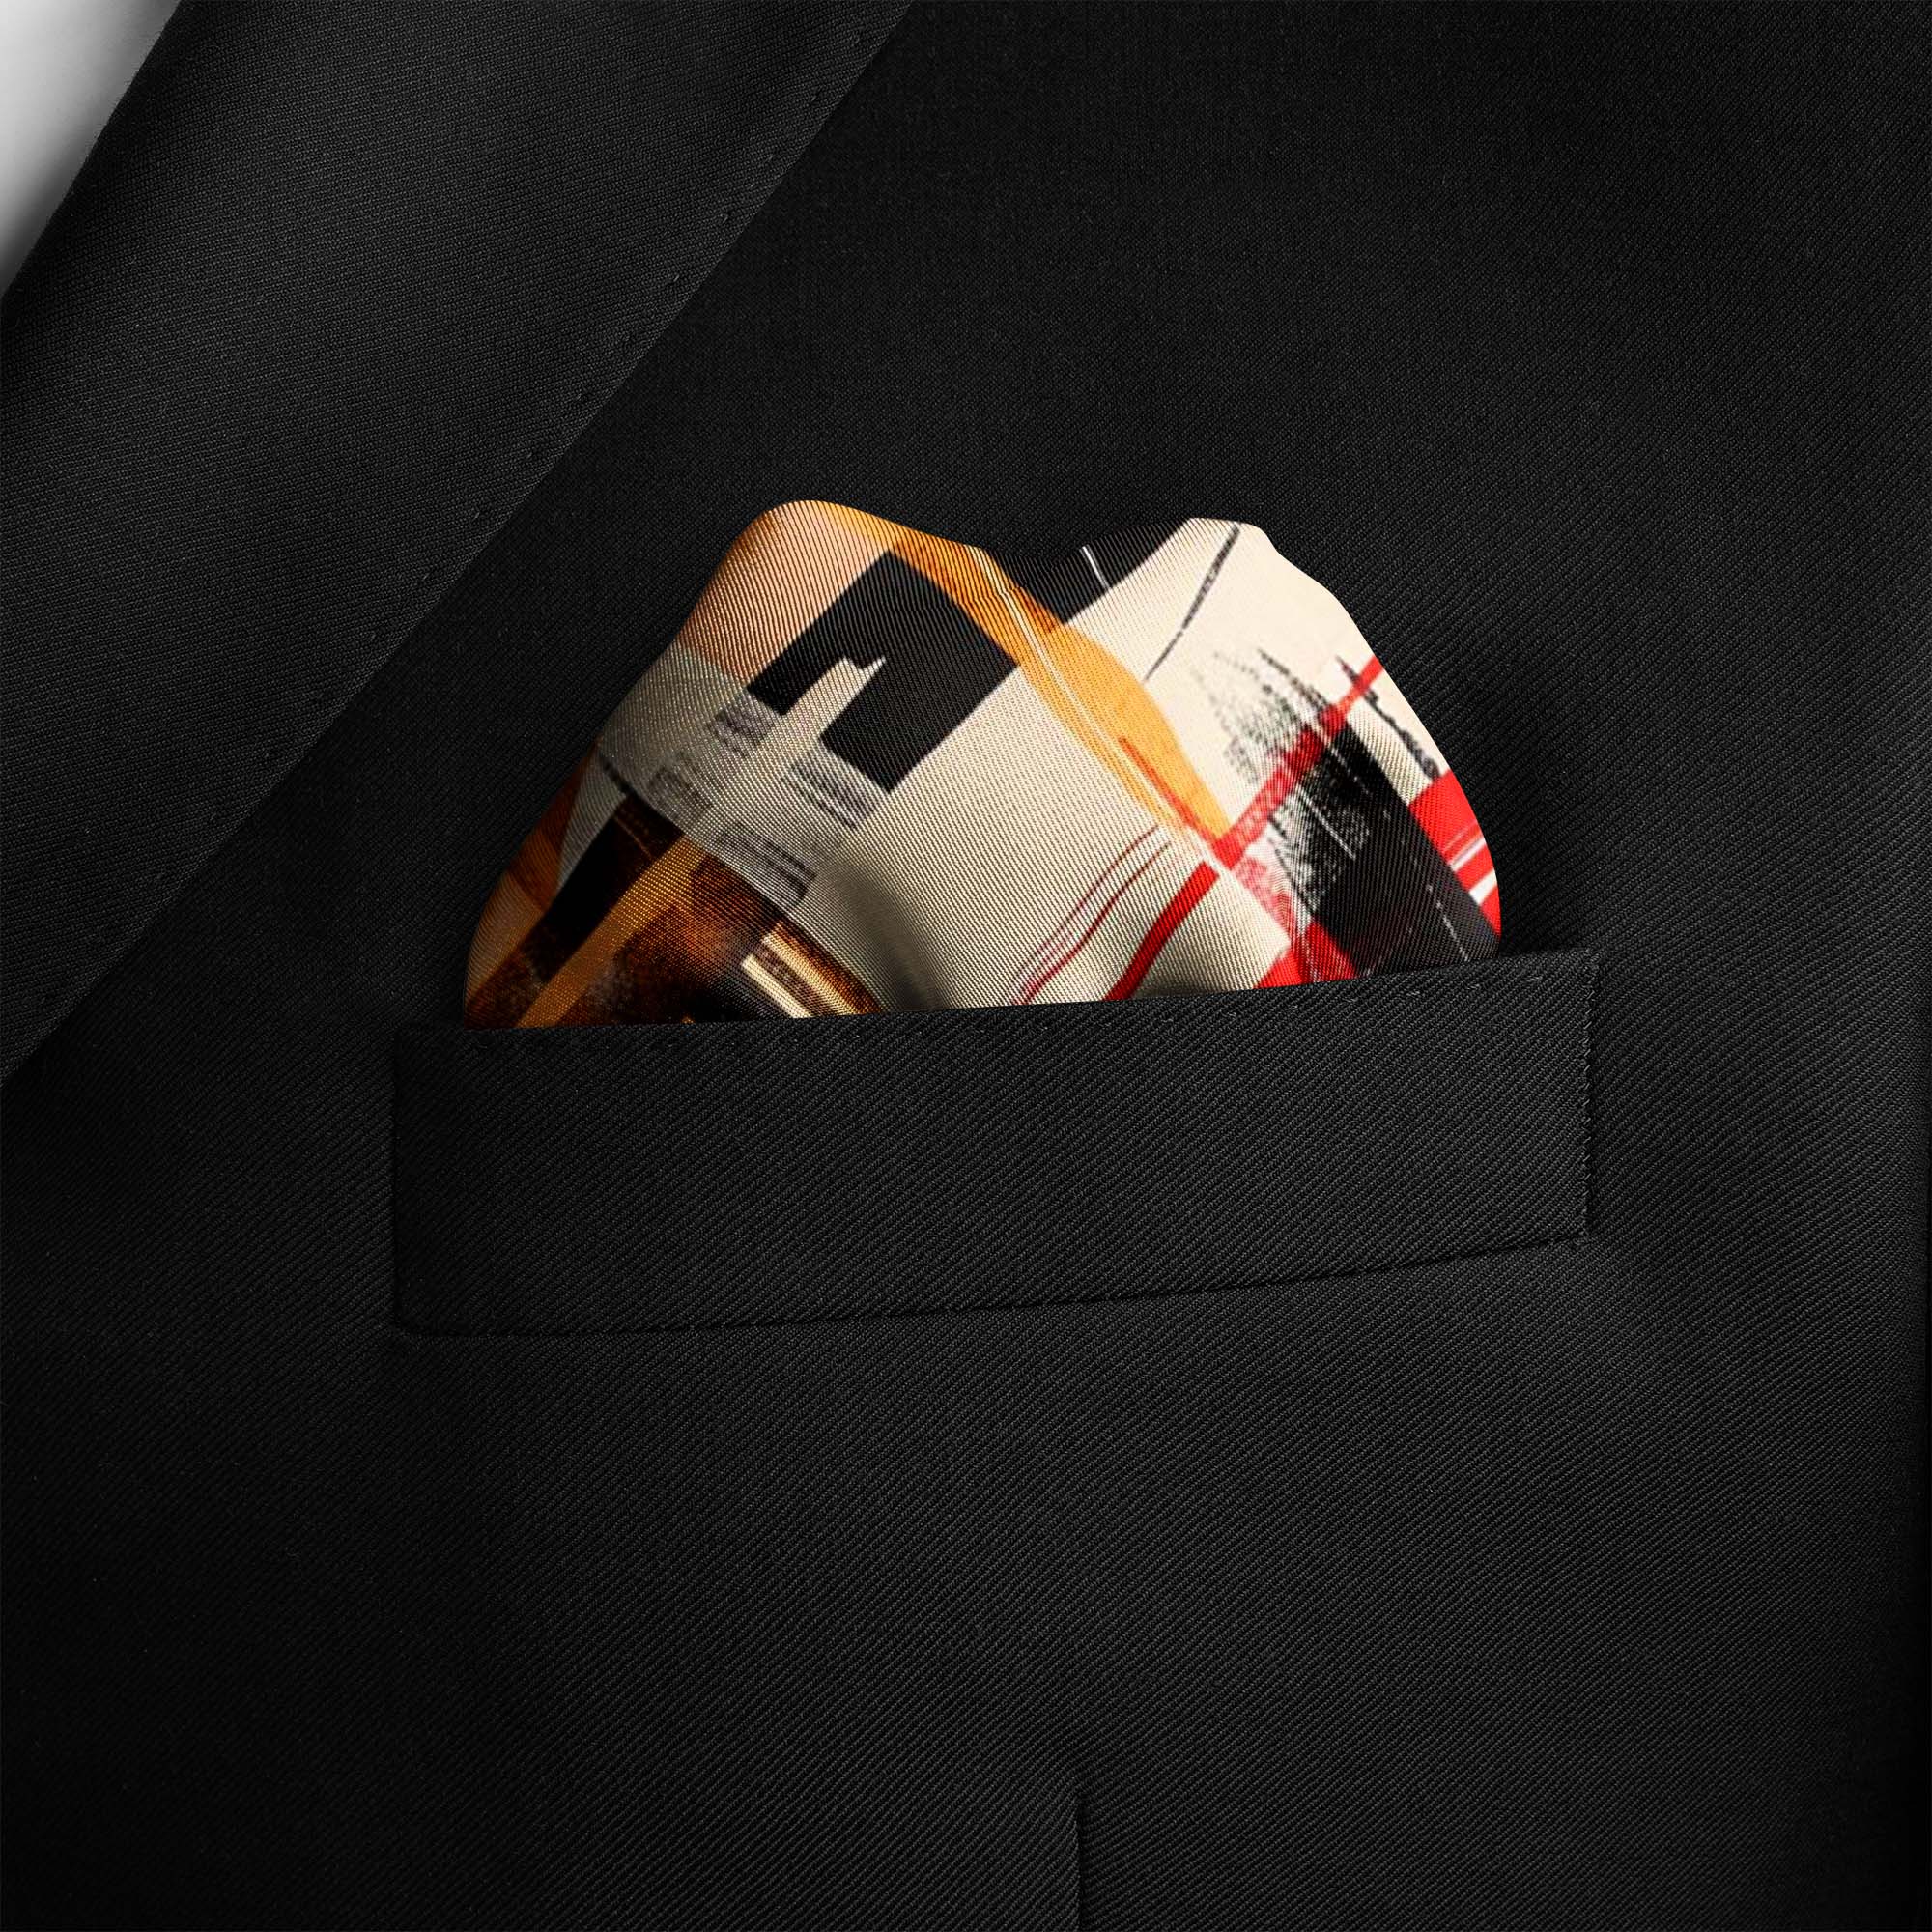 WARM LIVELY ABSTRACT PATTERN SILK POCKET SQUARE